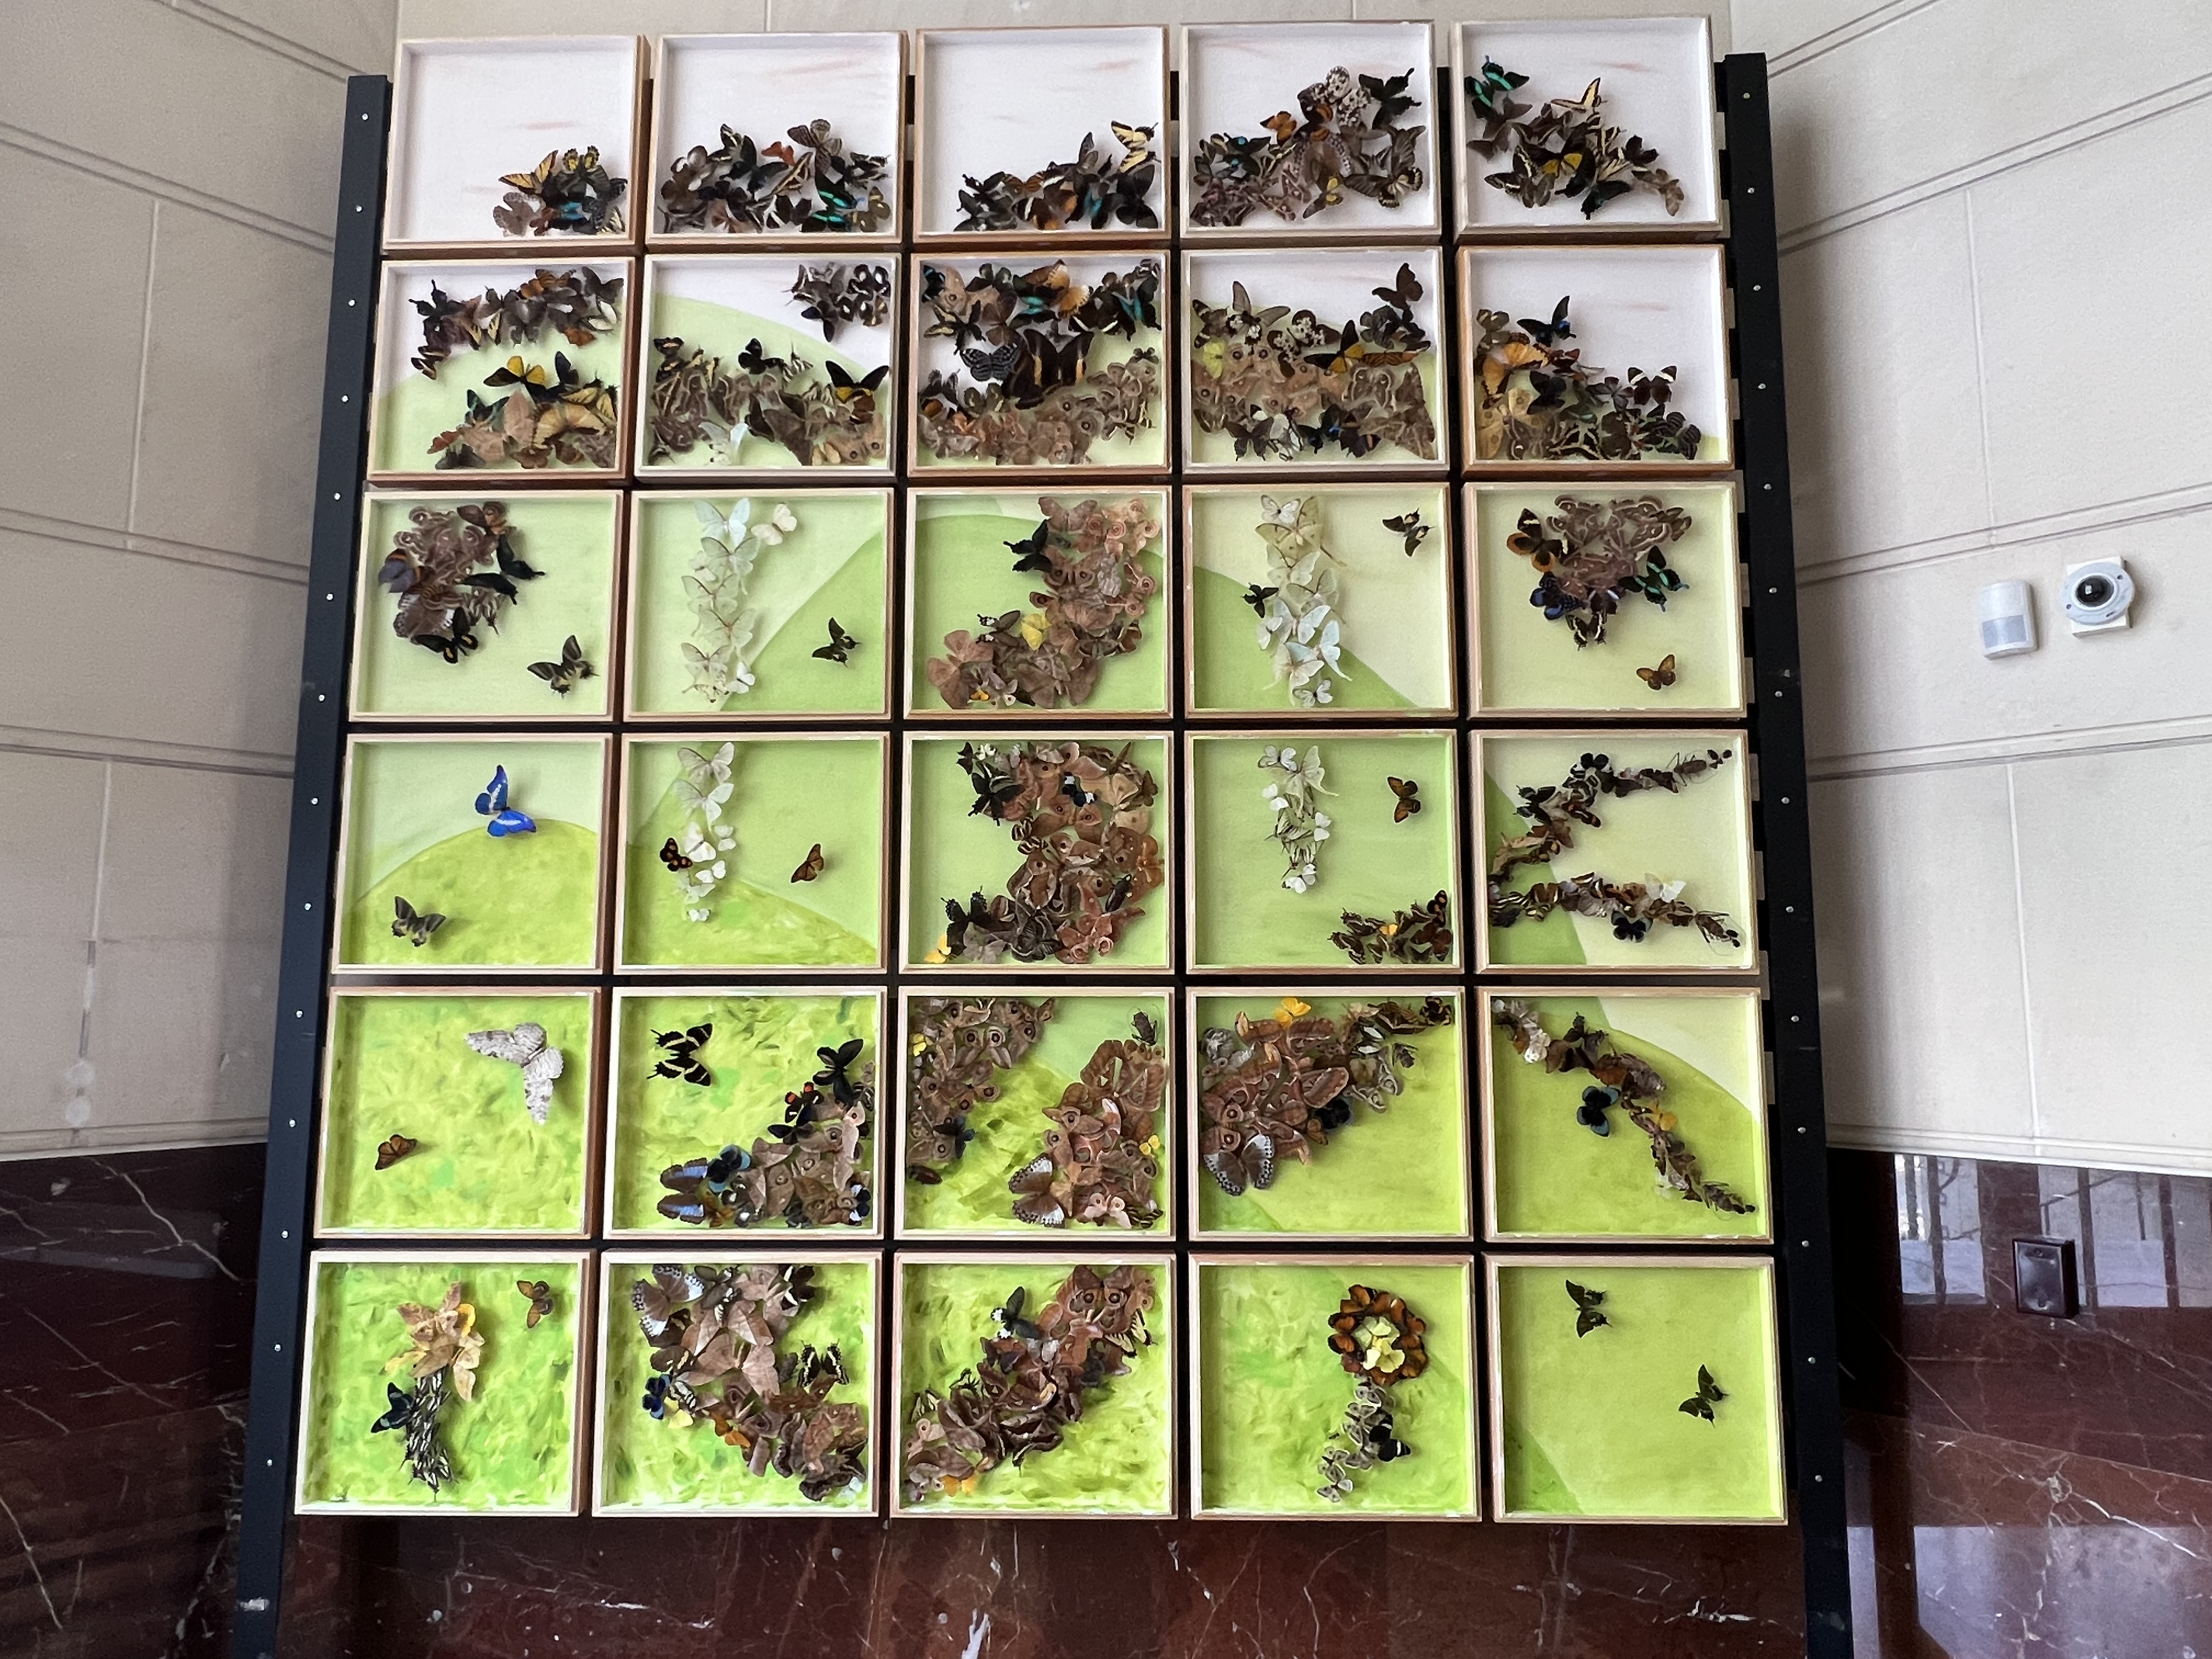 Image of specimen boxes filled with preserved butterflies in the shape of a tree with a green background